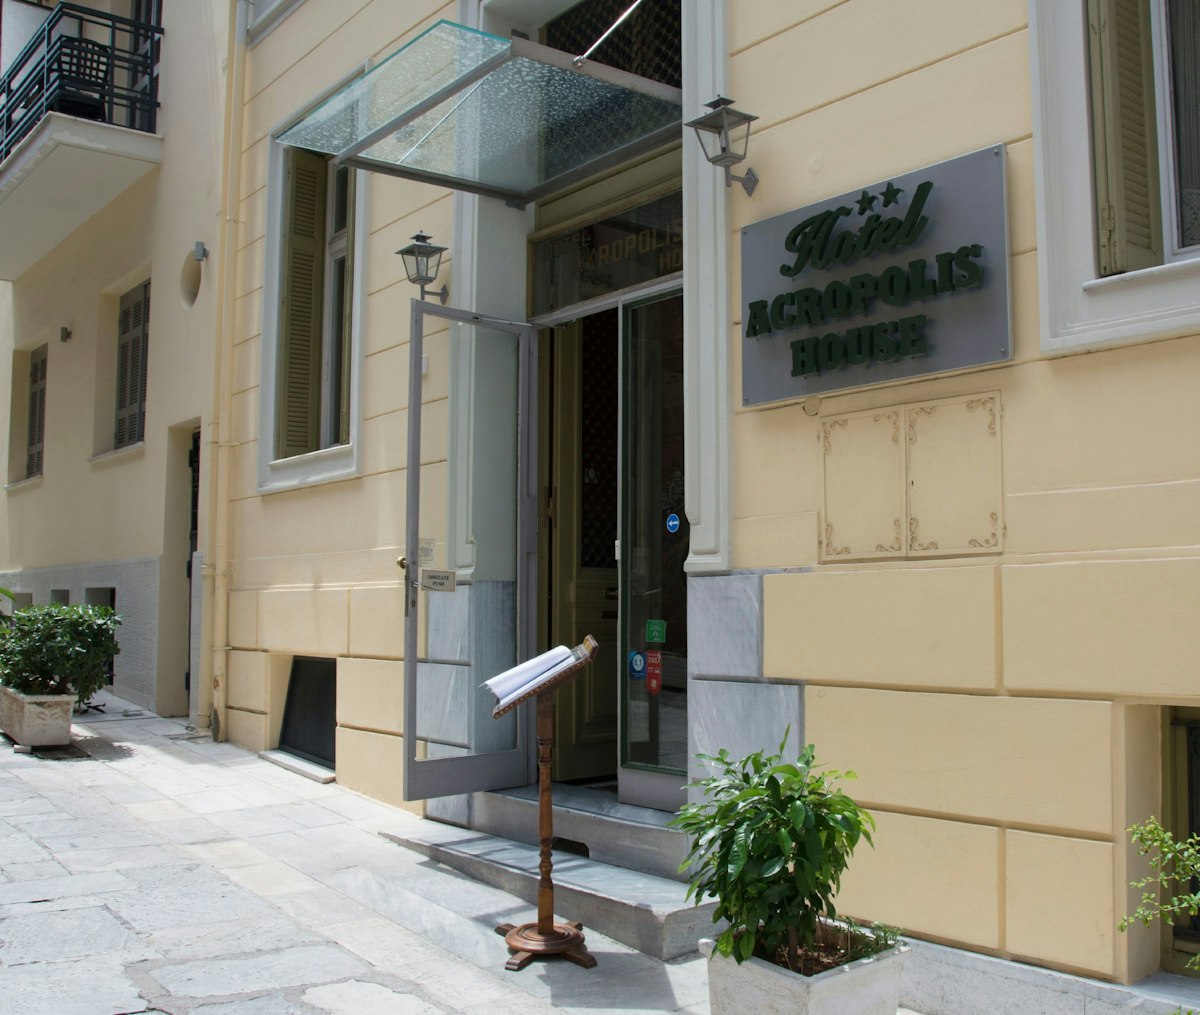 Entrance to Acropolis House Pension in Athens